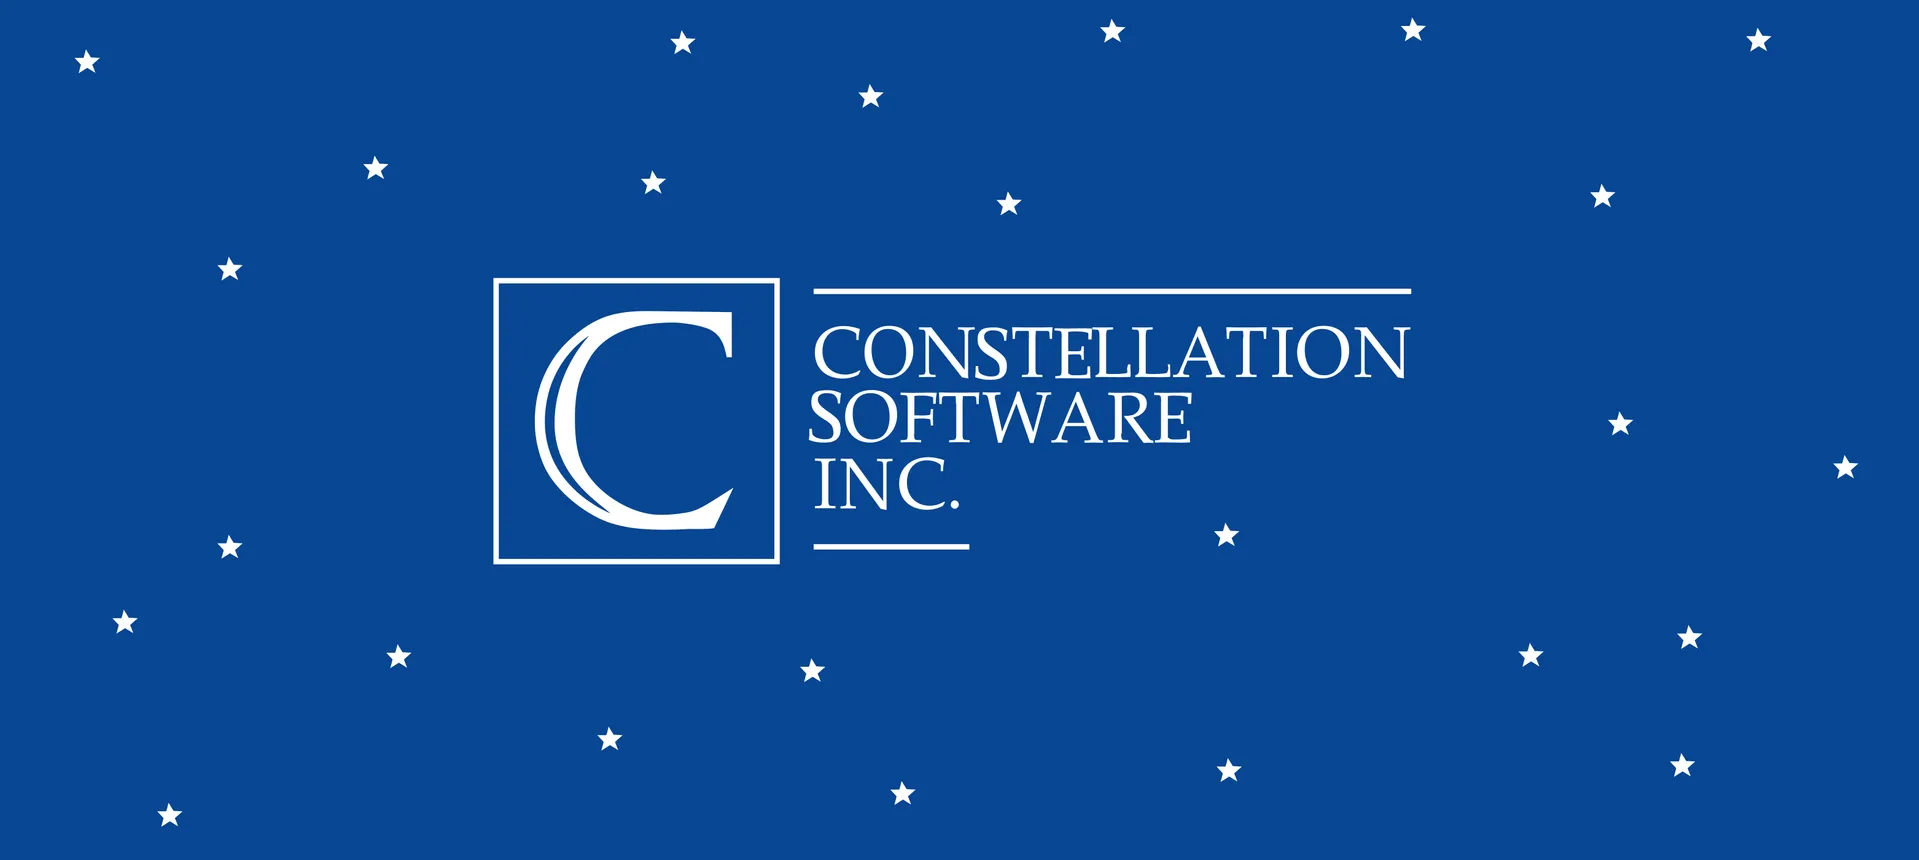 Constellation Software Inc.: Positioned for Continued Growth Amidst Strategic Moves